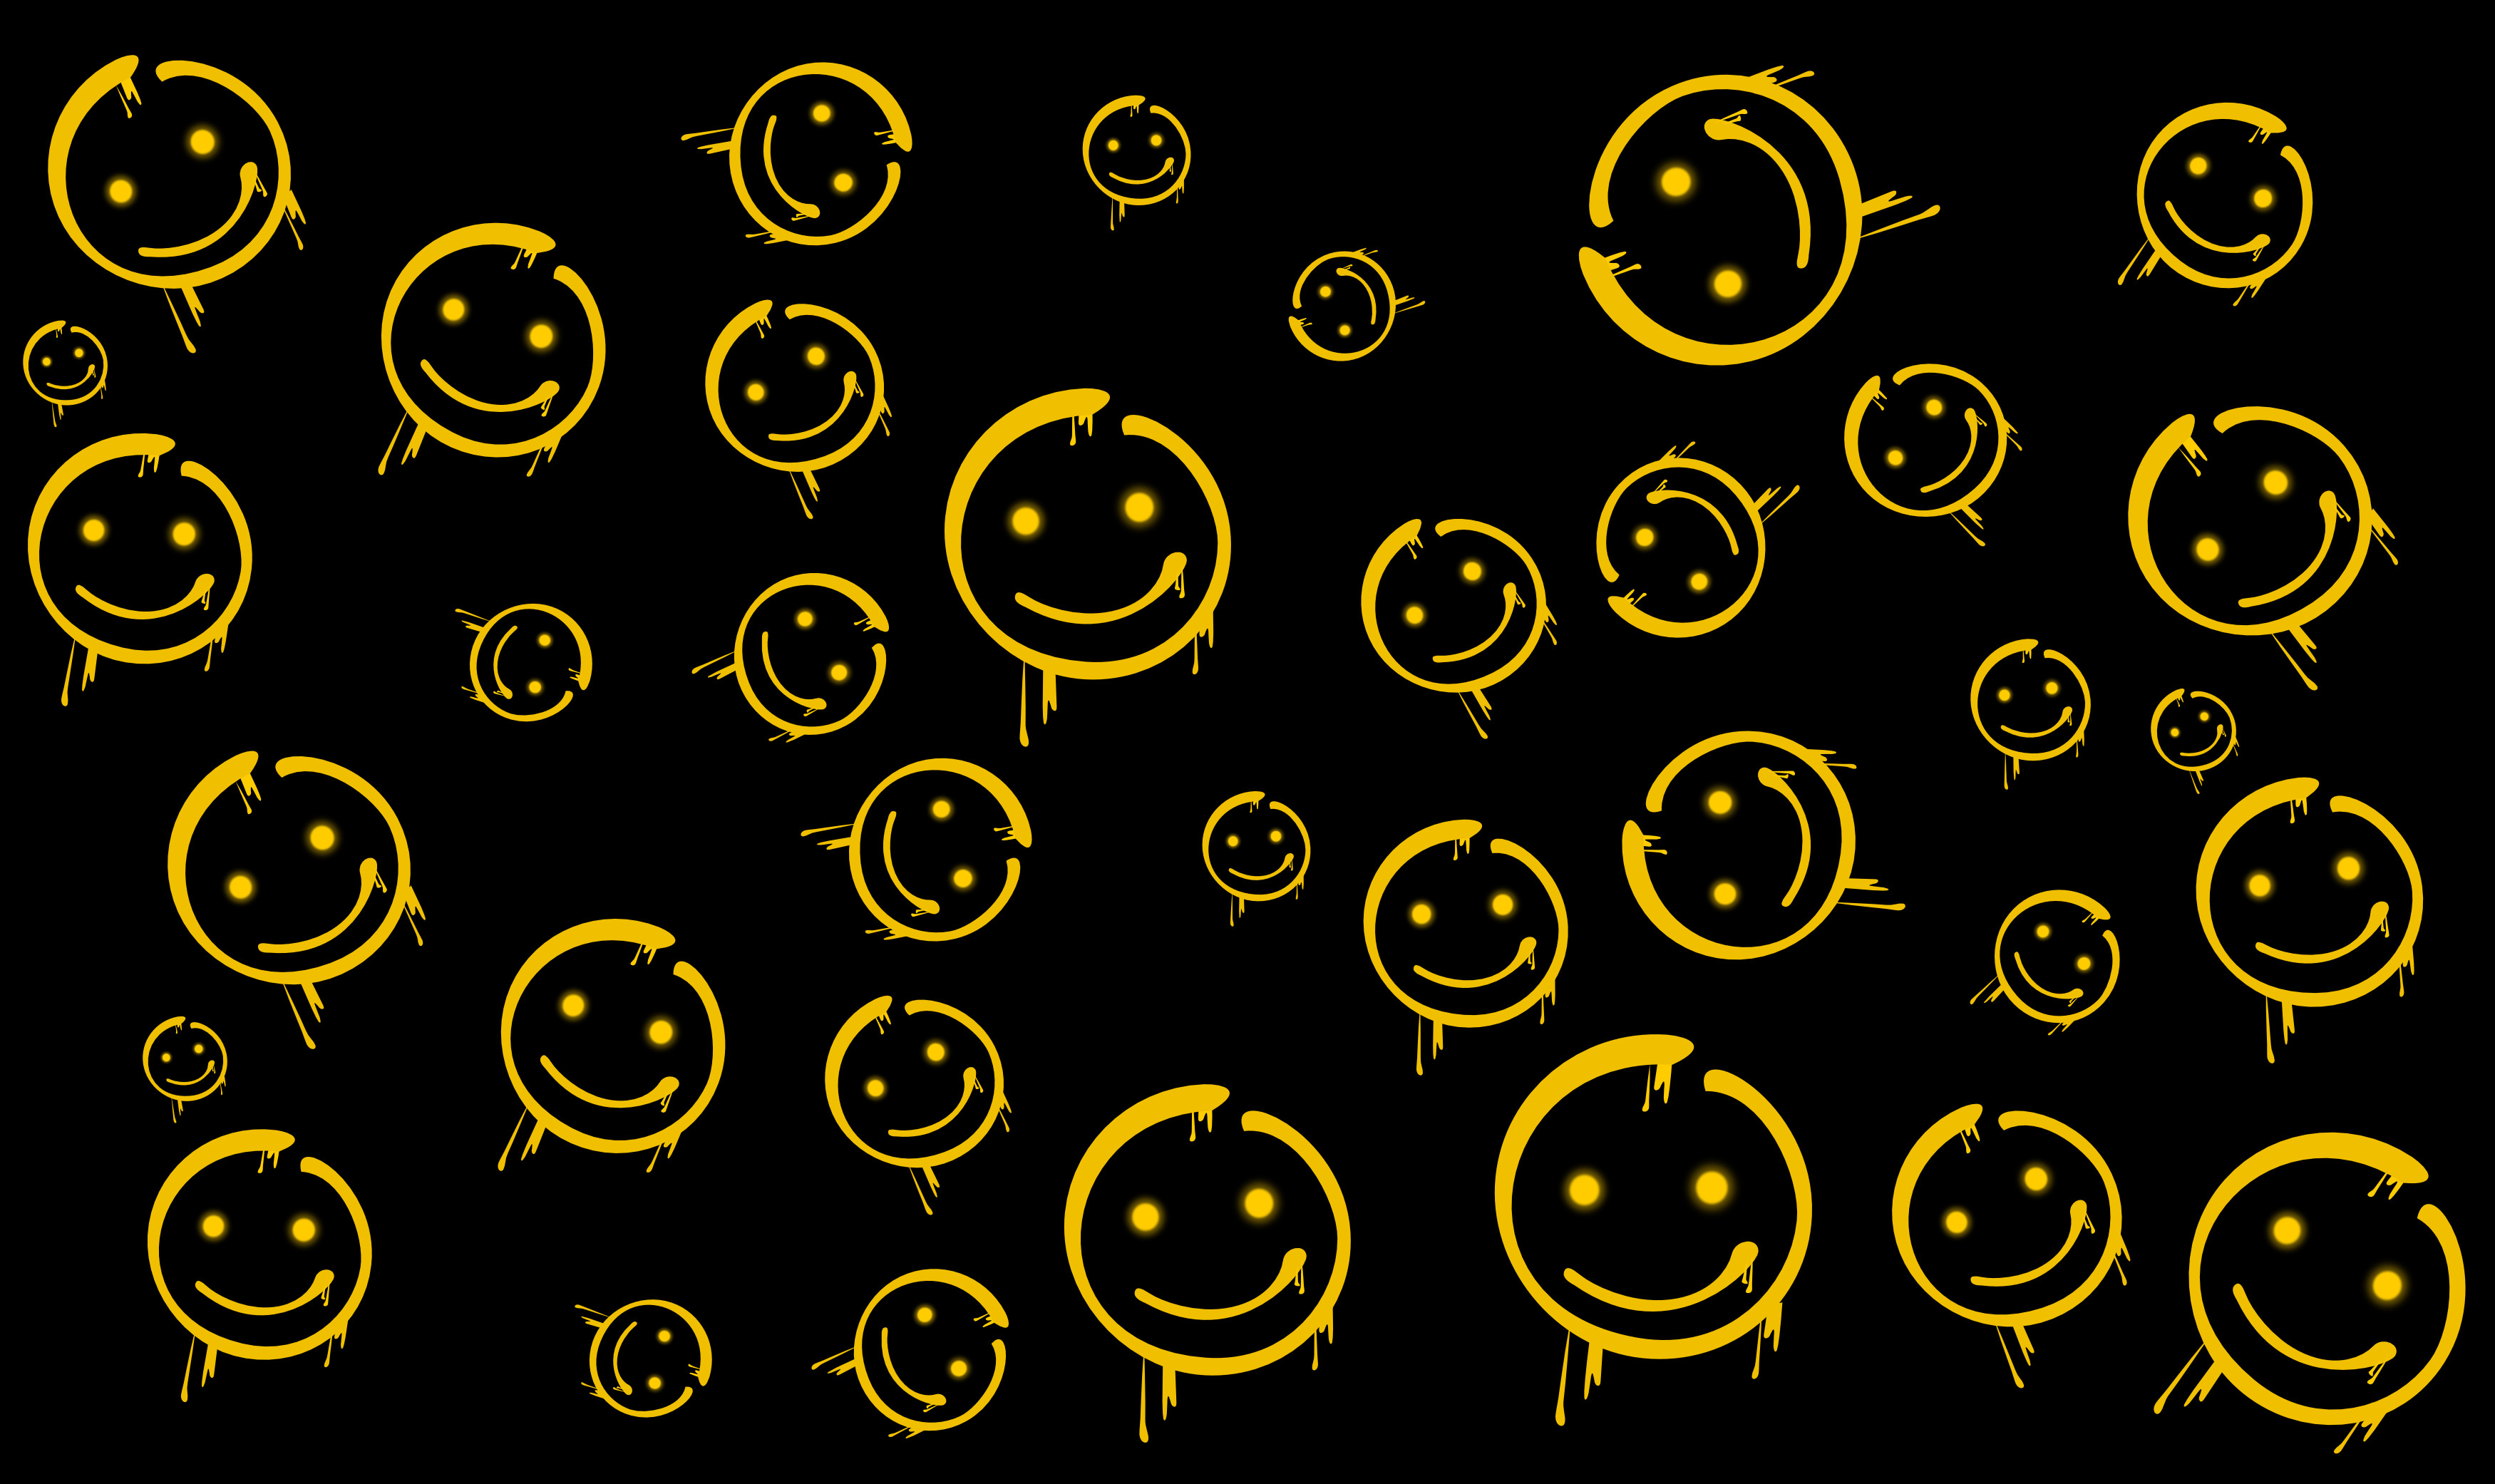 Mx74 Bored Adorable Desktop Wallpapers For   Trippy Smiley 3500x2082